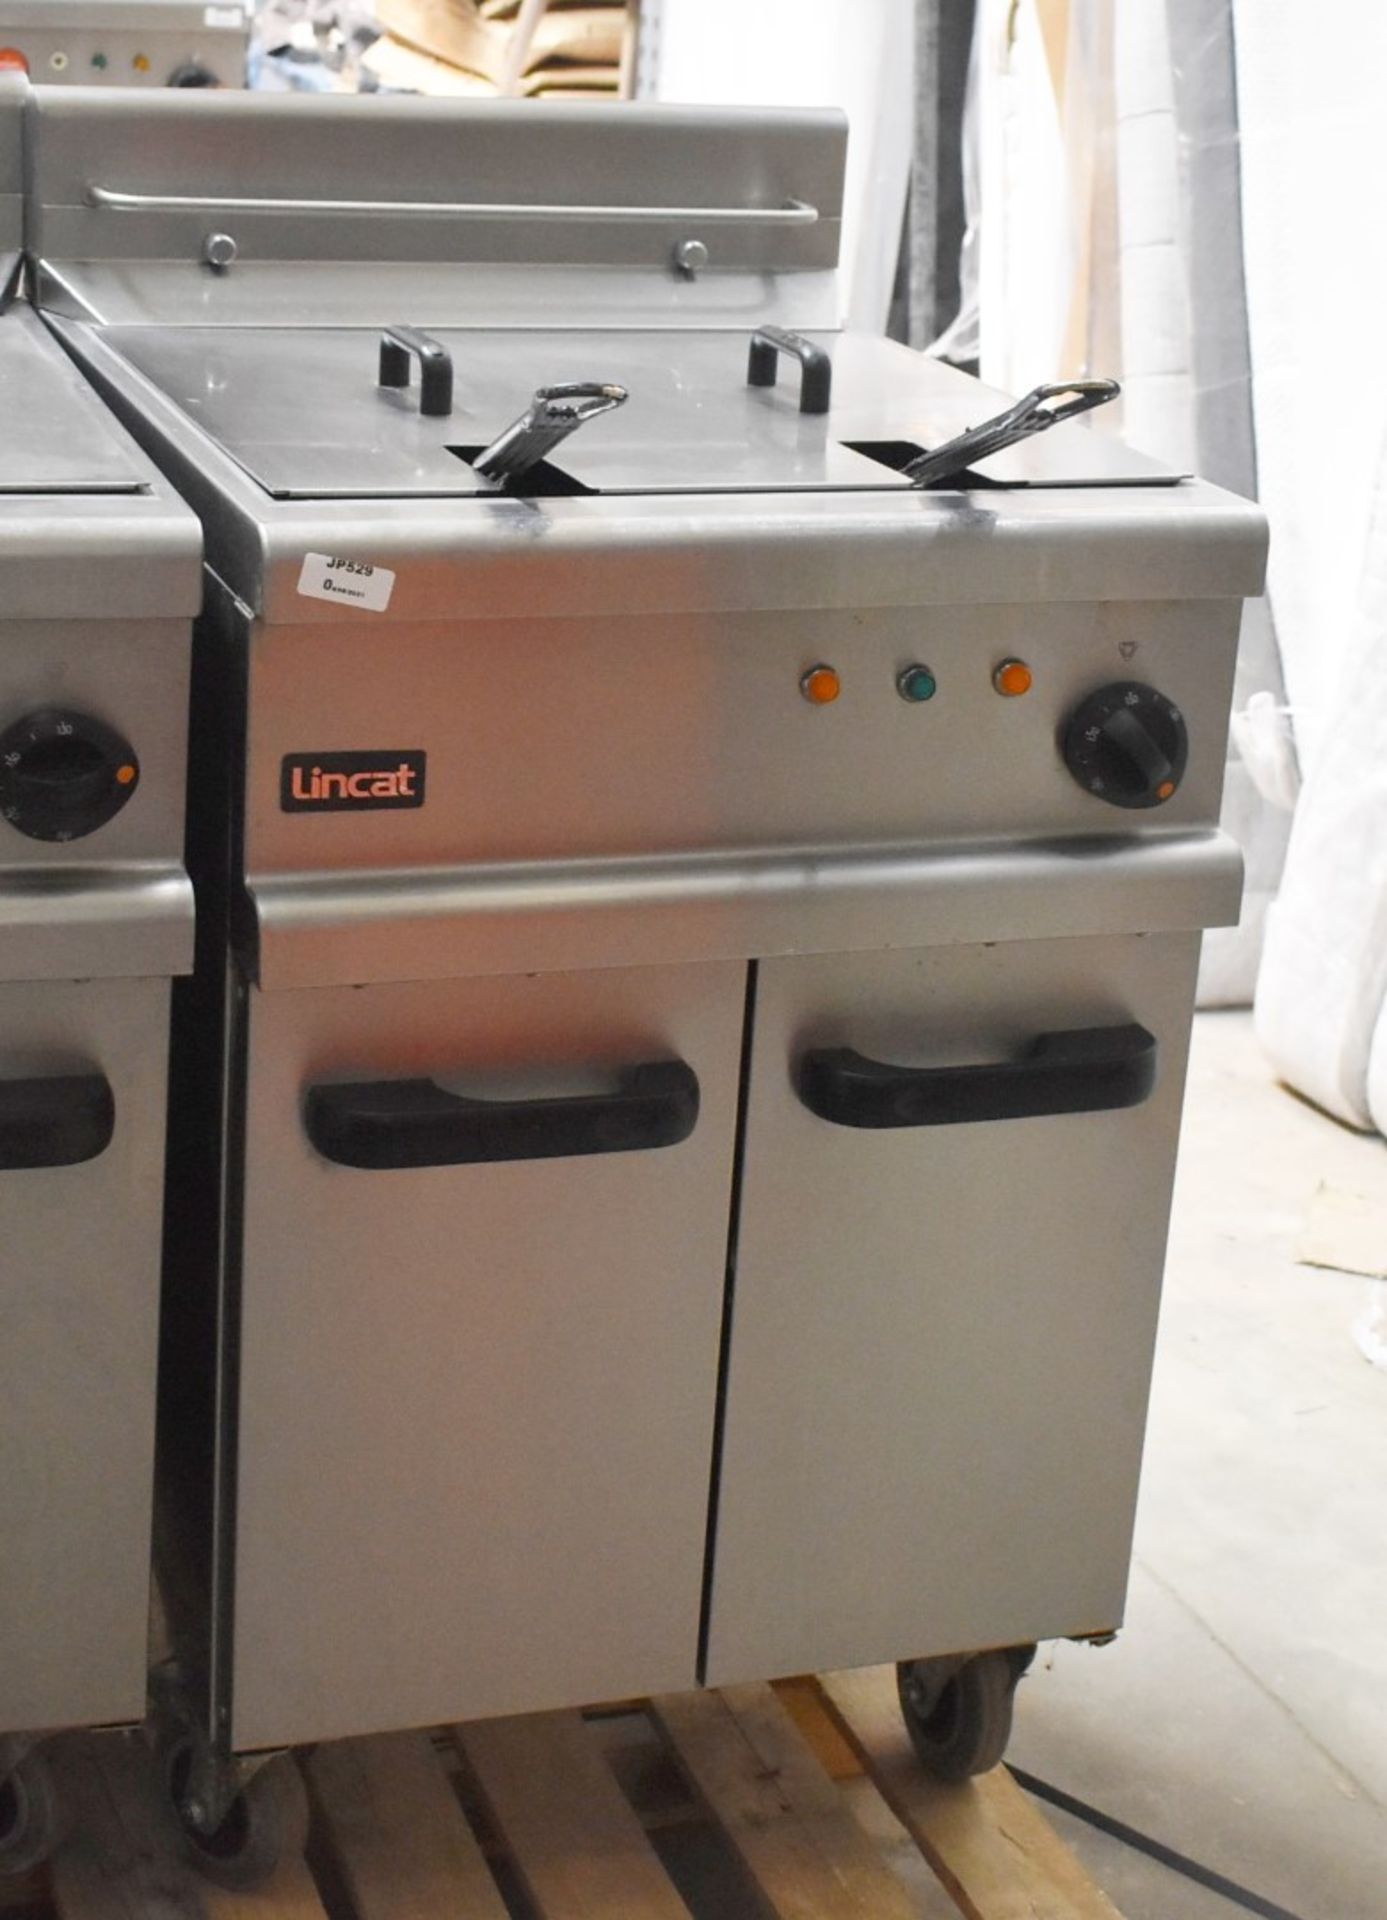 1 x Lincat Opus 700 OE7113 Single Large Tank Electric Fryer With Built In Filteration - 240V / 3PH - Image 5 of 11